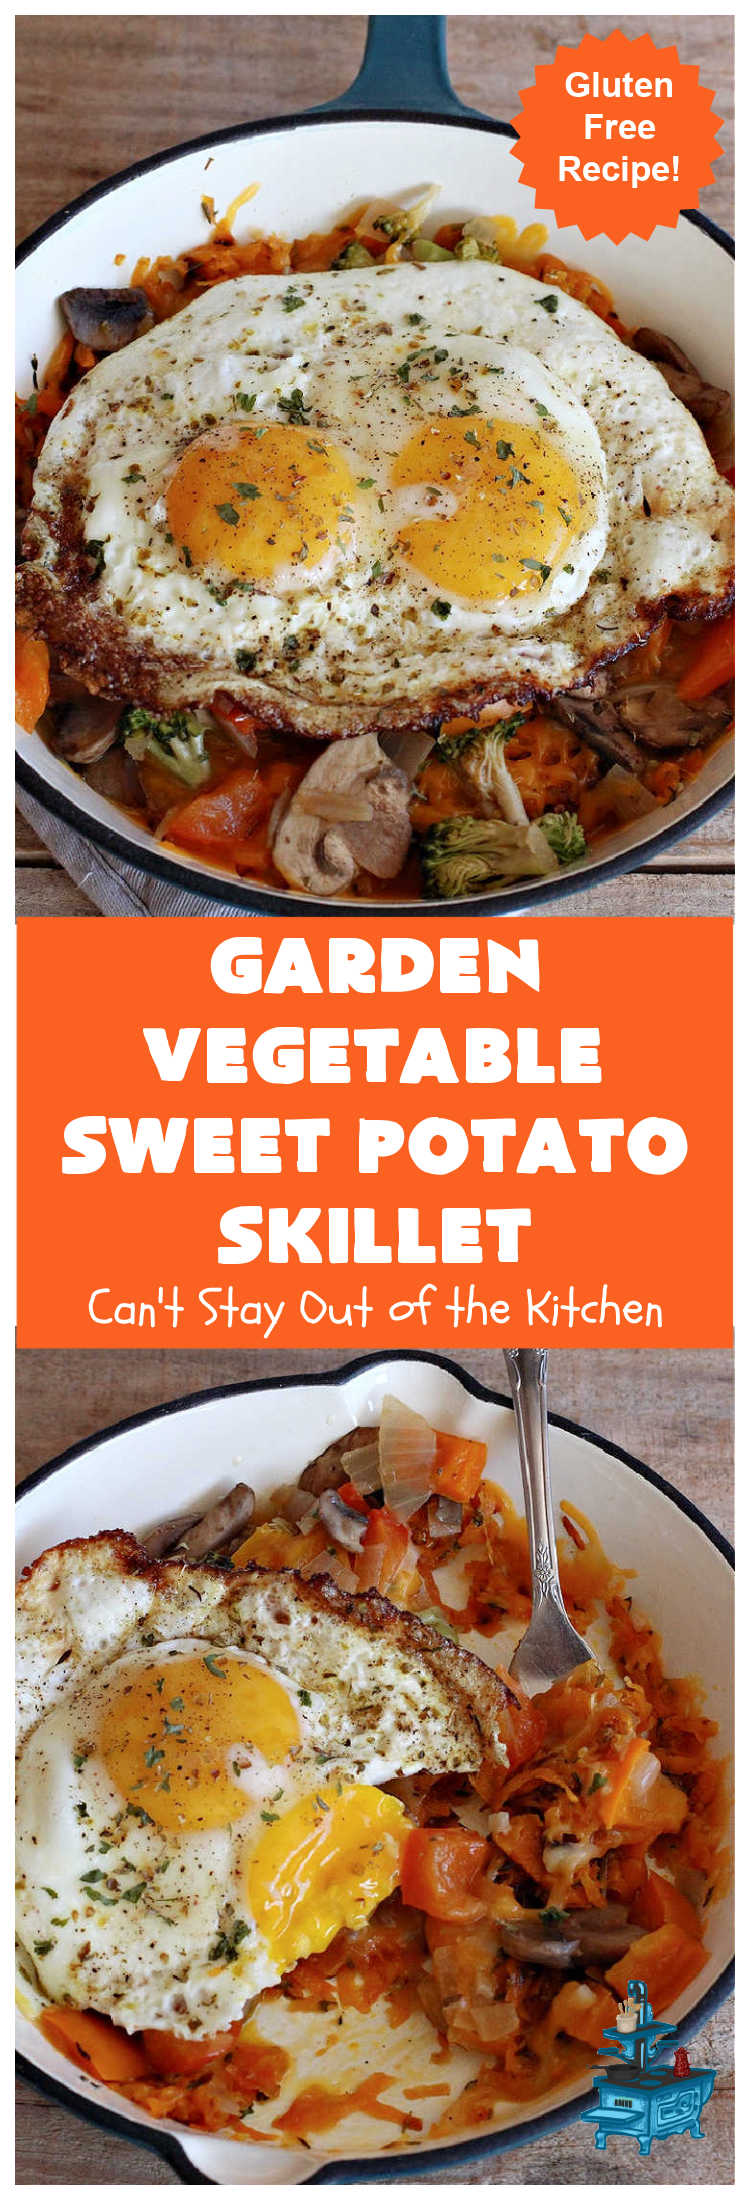 Garden Vegetable Sweet Potato Skillet | Can't Stay Out of the Kitchen | this is a fantastic #BreakfastSkillet #recipe that's #vegetarian. It includes lots of veggies including #SweetPotatoes, #tomatoes, #broccoli & #mushrooms along with #MontereyJack & #CheddarCheese. Along with #eggs this makes for one hearty, healthy and deliciously satisfying #breakfast entree. Great for a weekend, company or #holiday breakfast or #brunch. #SkilletBreakfast #HolidayBreakfast #MeatlessMonday #GlutenFree #GardenVegetableSweetPotatoSkilletGarden Vegetable Sweet Potato Skillet | Can't Stay Out of the Kitchen | this is a fantastic #BreakfastSkillet #recipe that's #vegetarian. It includes lots of veggies including #SweetPotatoes, #tomatoes, #broccoli & #mushrooms along with #MontereyJack & #CheddarCheese. Along with #eggs this makes for one hearty, healthy and deliciously satisfying #breakfast entree. Great for a weekend, company or #holiday breakfast or #brunch. #SkilletBreakfast #HolidayBreakfast #MeatlessMonday #GlutenFree #GardenVegetableSweetPotatoSkillet